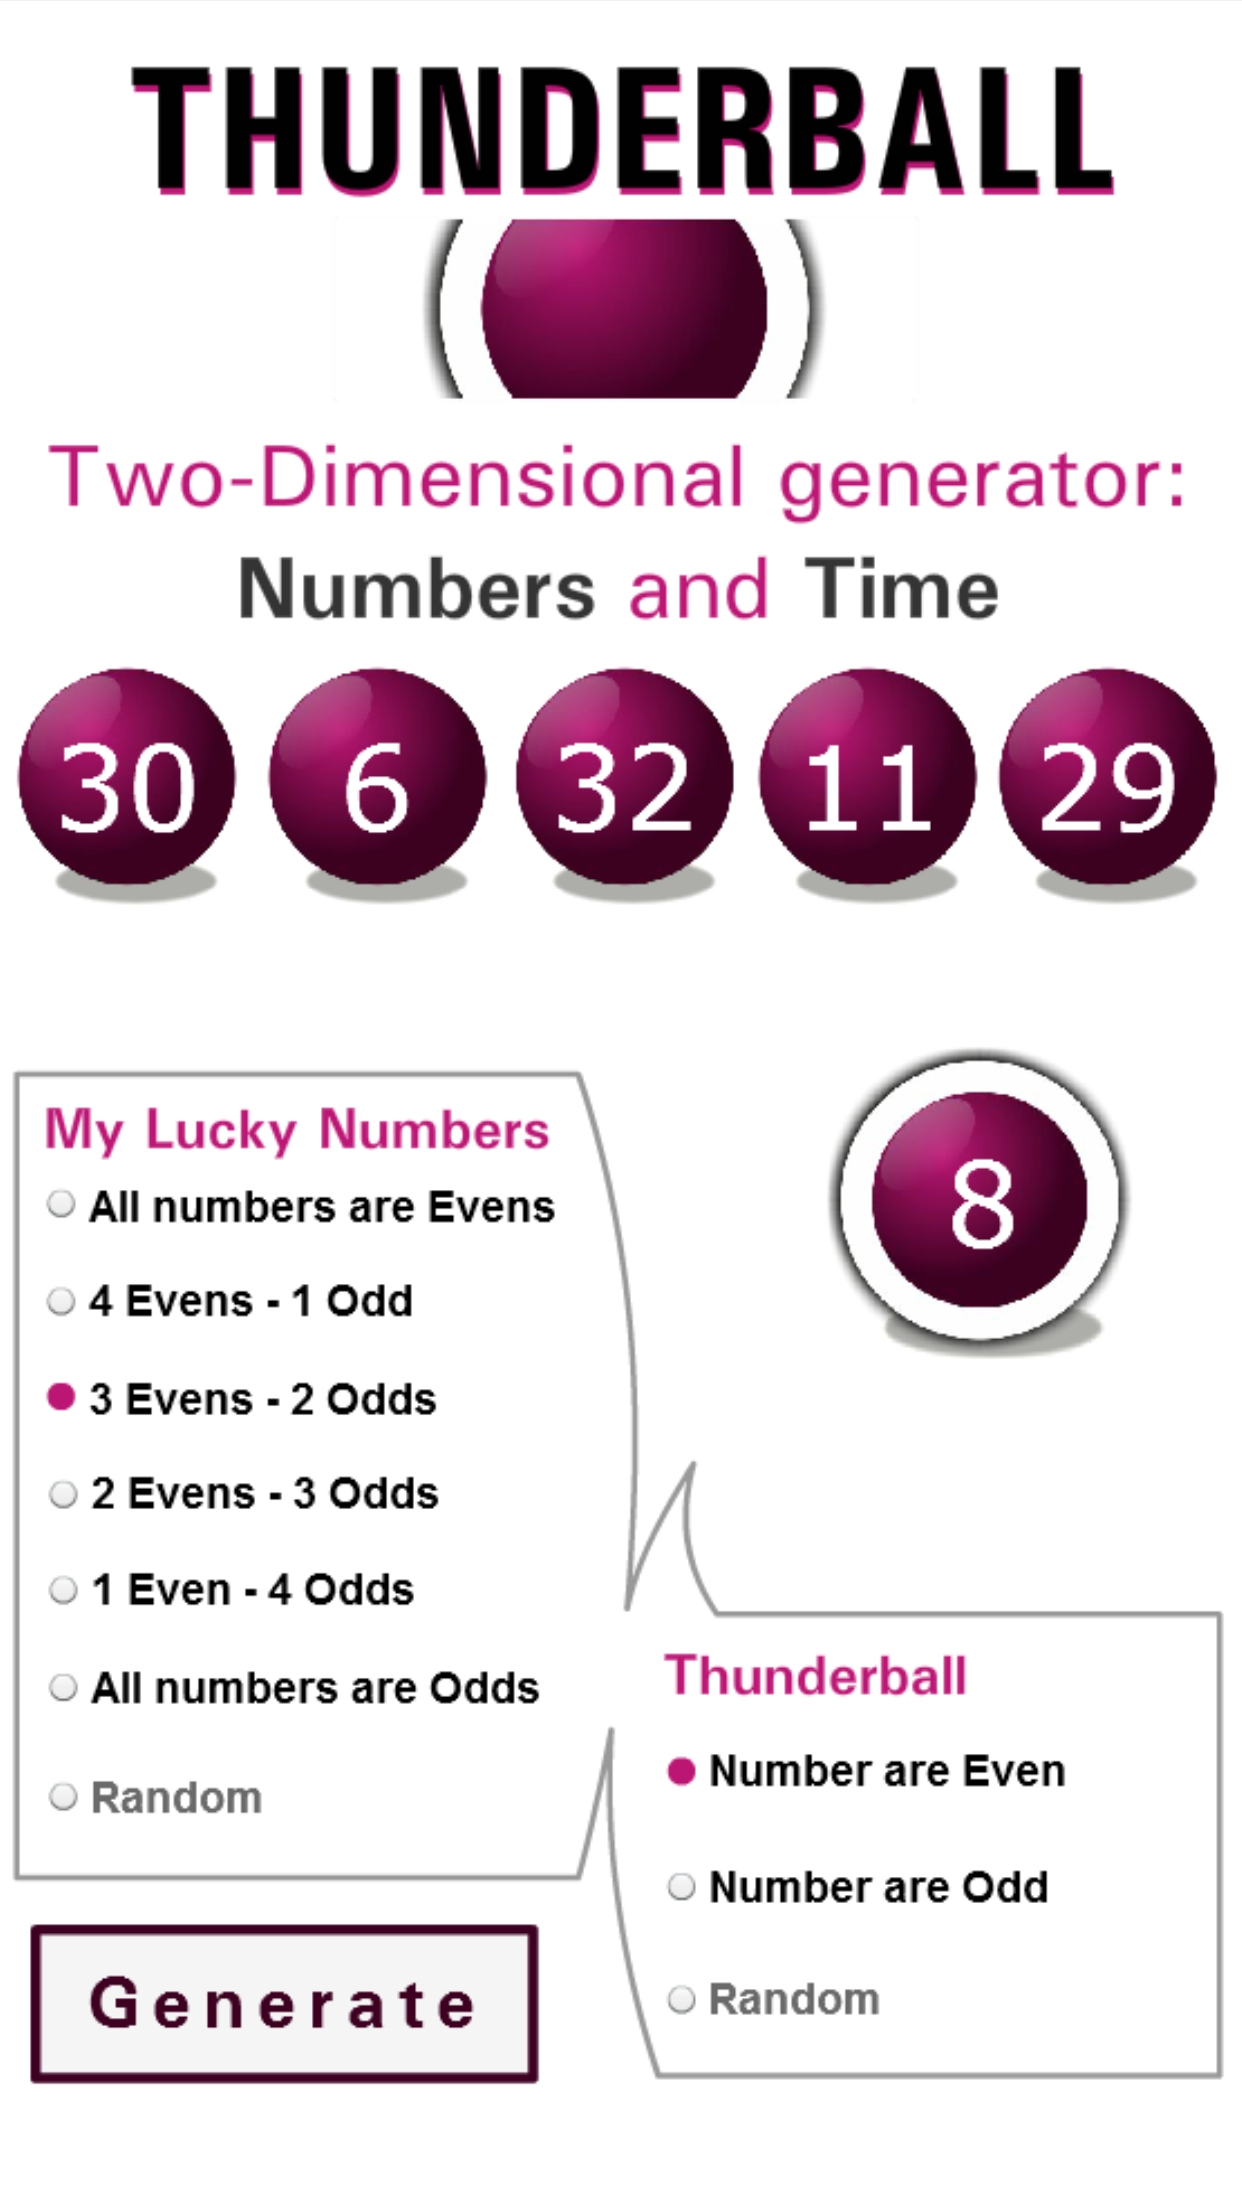 Thunderball |The National Lottery| Results, Tips, Winning Numbers